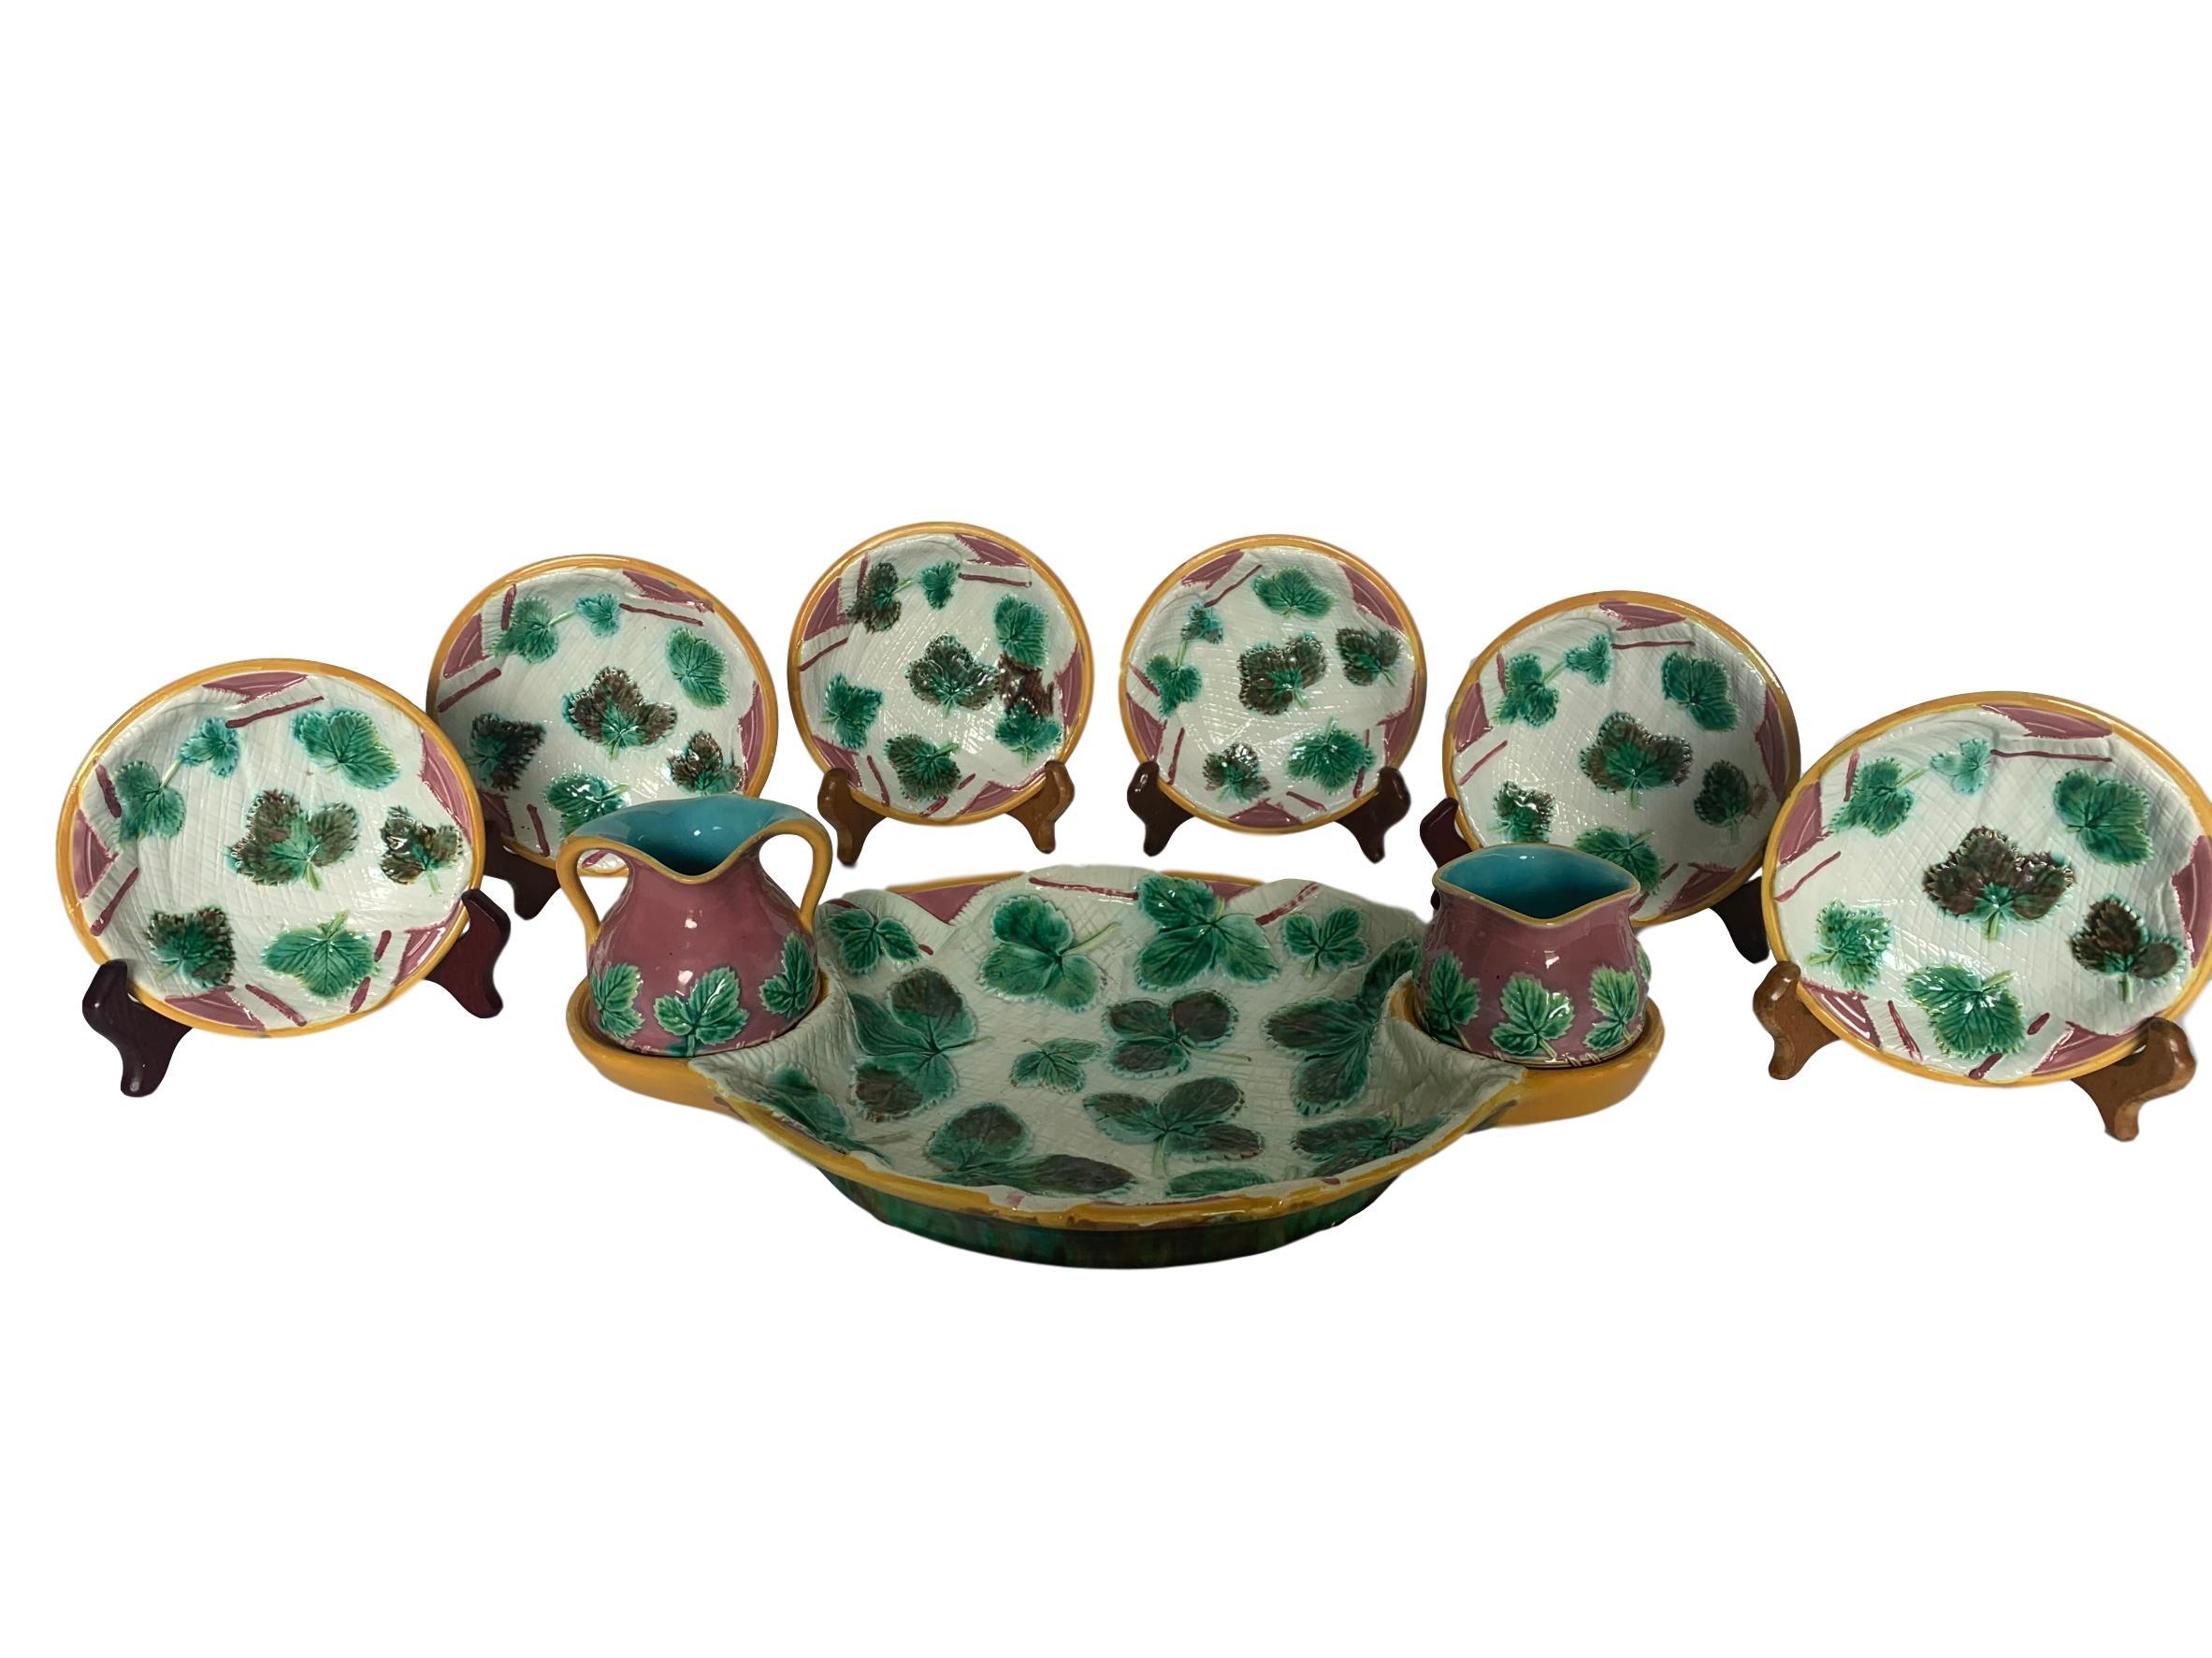 George Jones Majolica strawberry server 9-piece set consisting of strawberry server, creamer, sugar bowl and six berry bowls, English circa 1875. Great condition. Signed with cartouche stamp for George Jones & Sons, Stoke-upon-Trent.  Carteuse